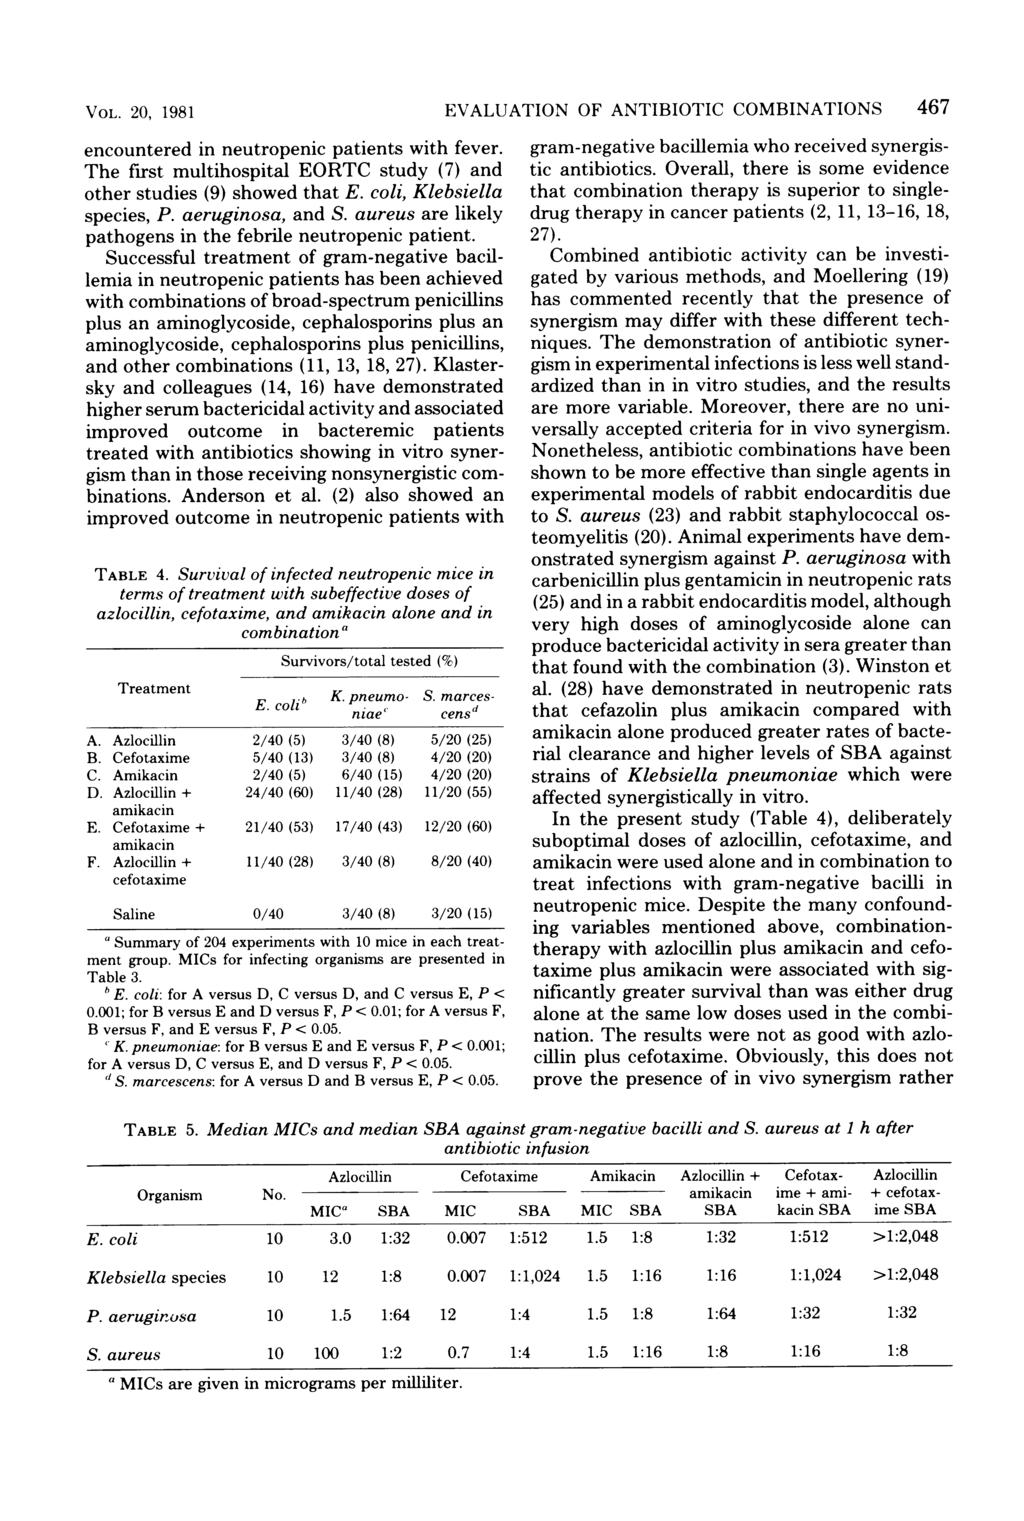 VOL. 20, 1981 encountered in neutropenic patients with fever. The first multihospital EORTC study (7) and other studies (9) showed that E. coli, Klebsiella species, P. aeruginosa, and S.